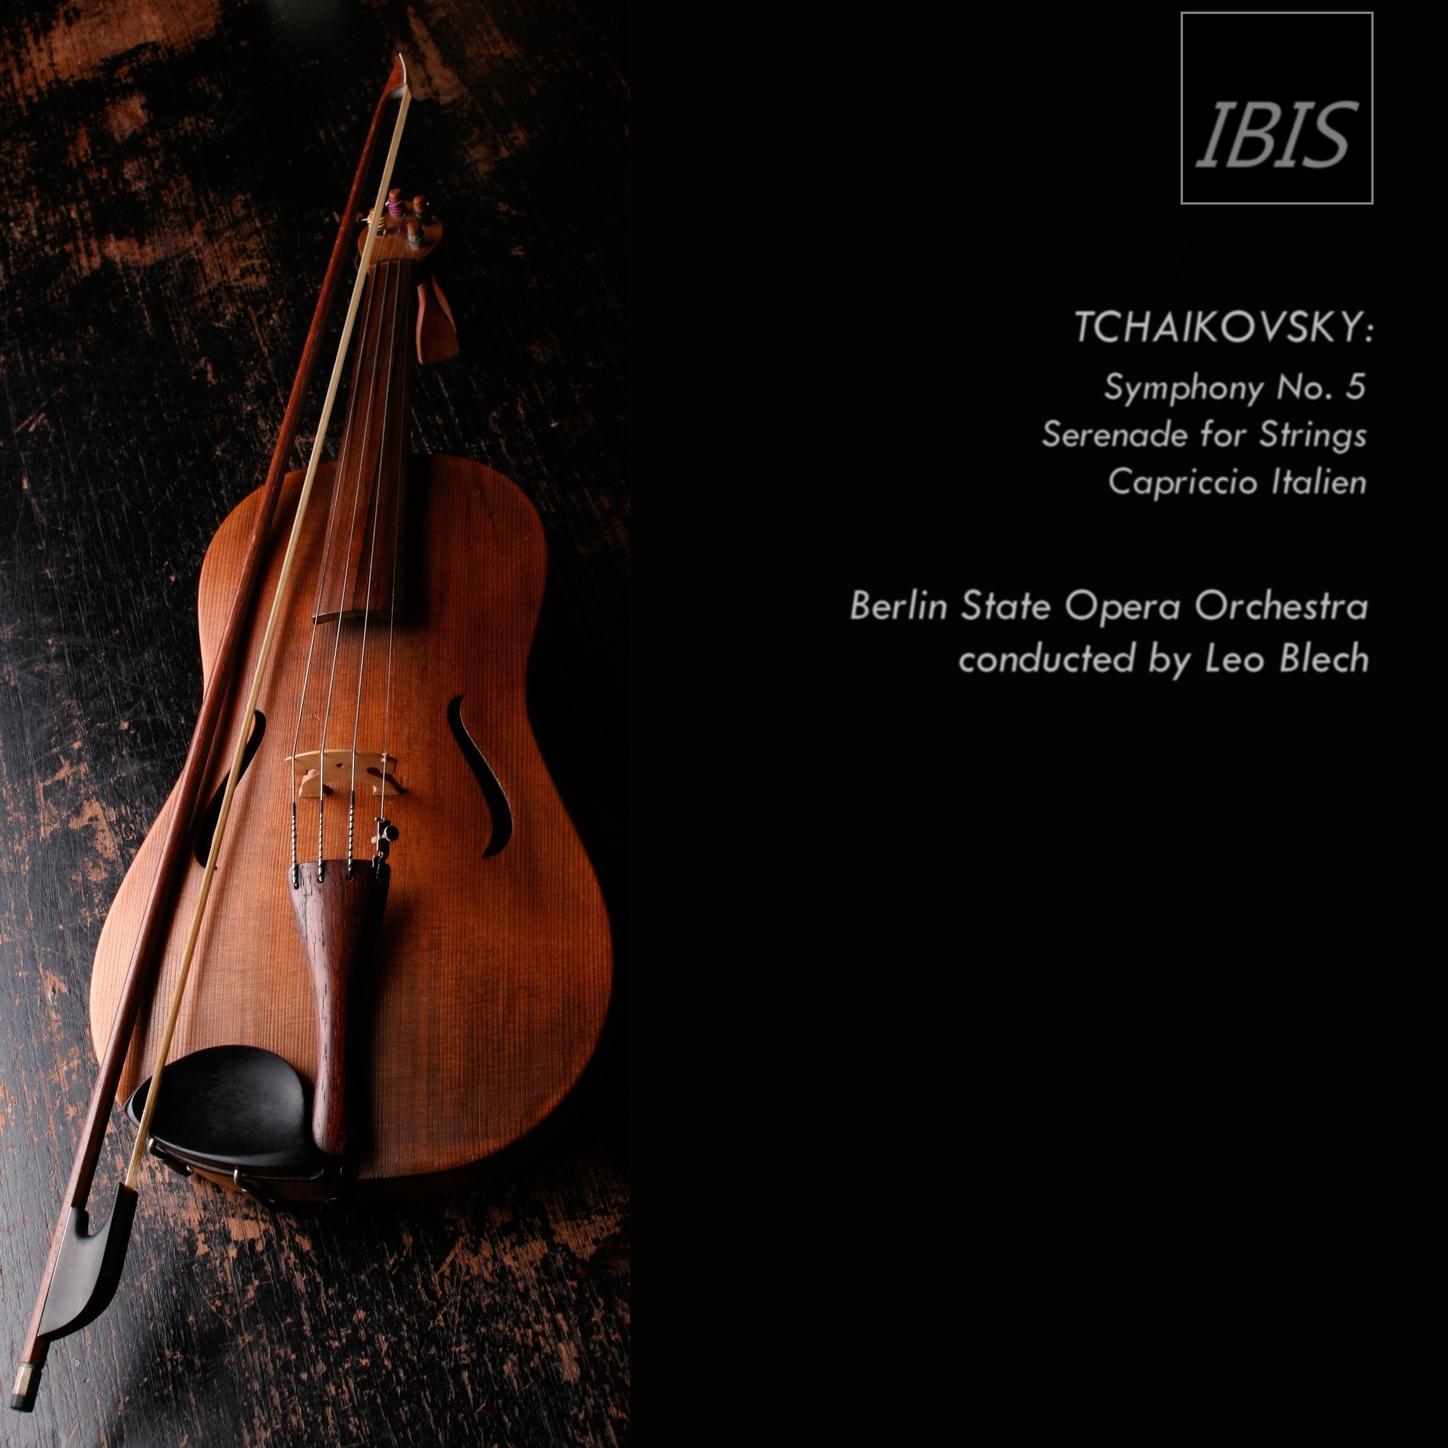 Tchaikovsky: Serenade for String Orchestra, Op. 48: IV. Finale - Tema Russo